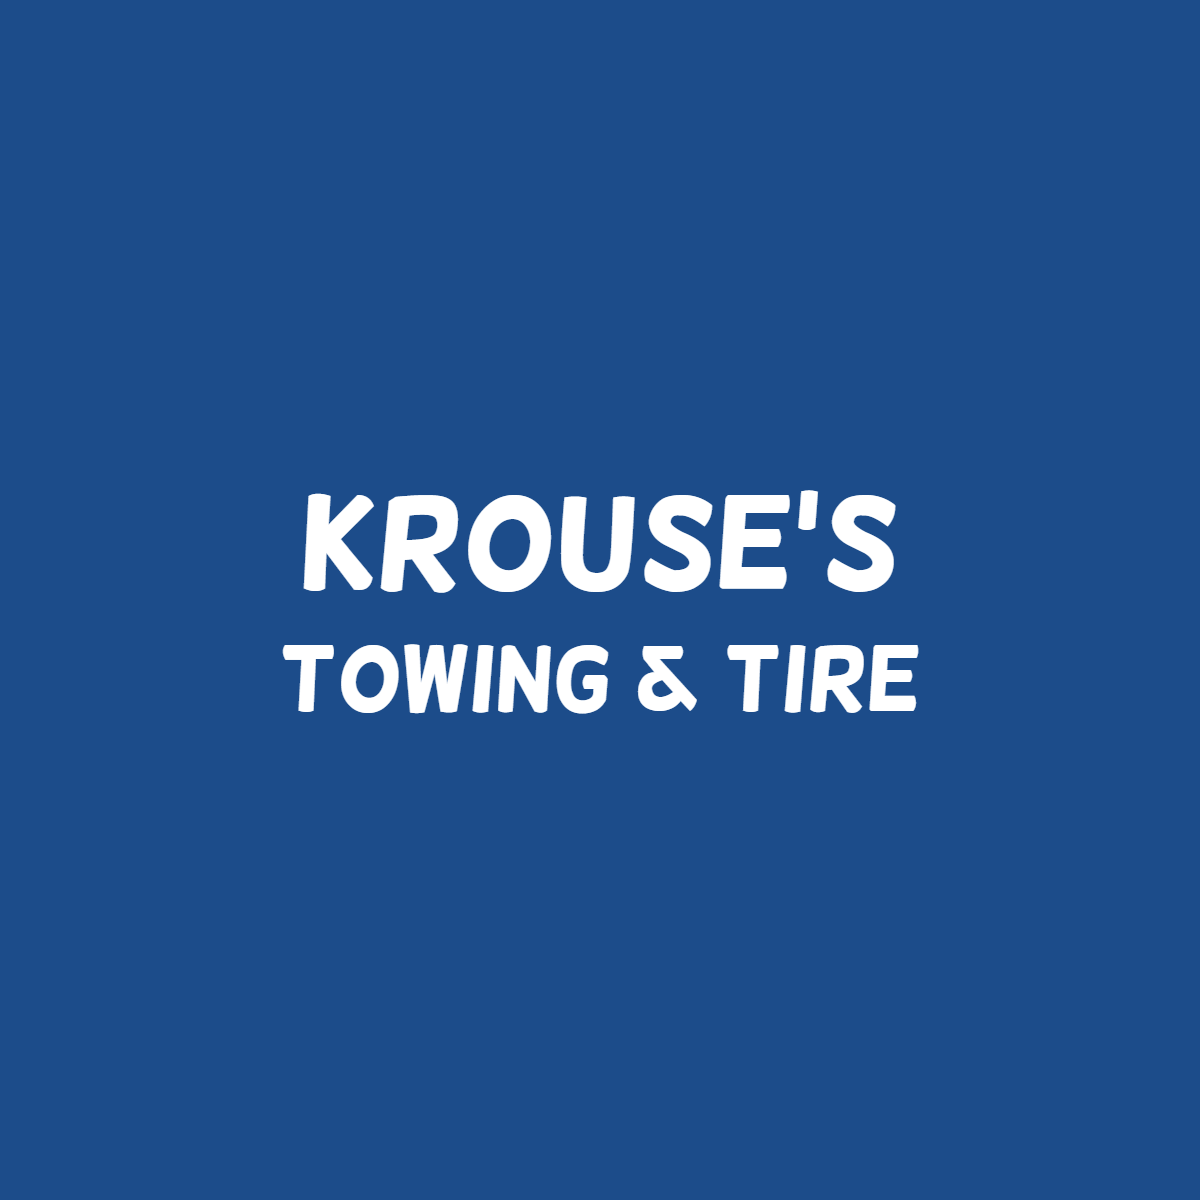 Krouse's Towing & Tire